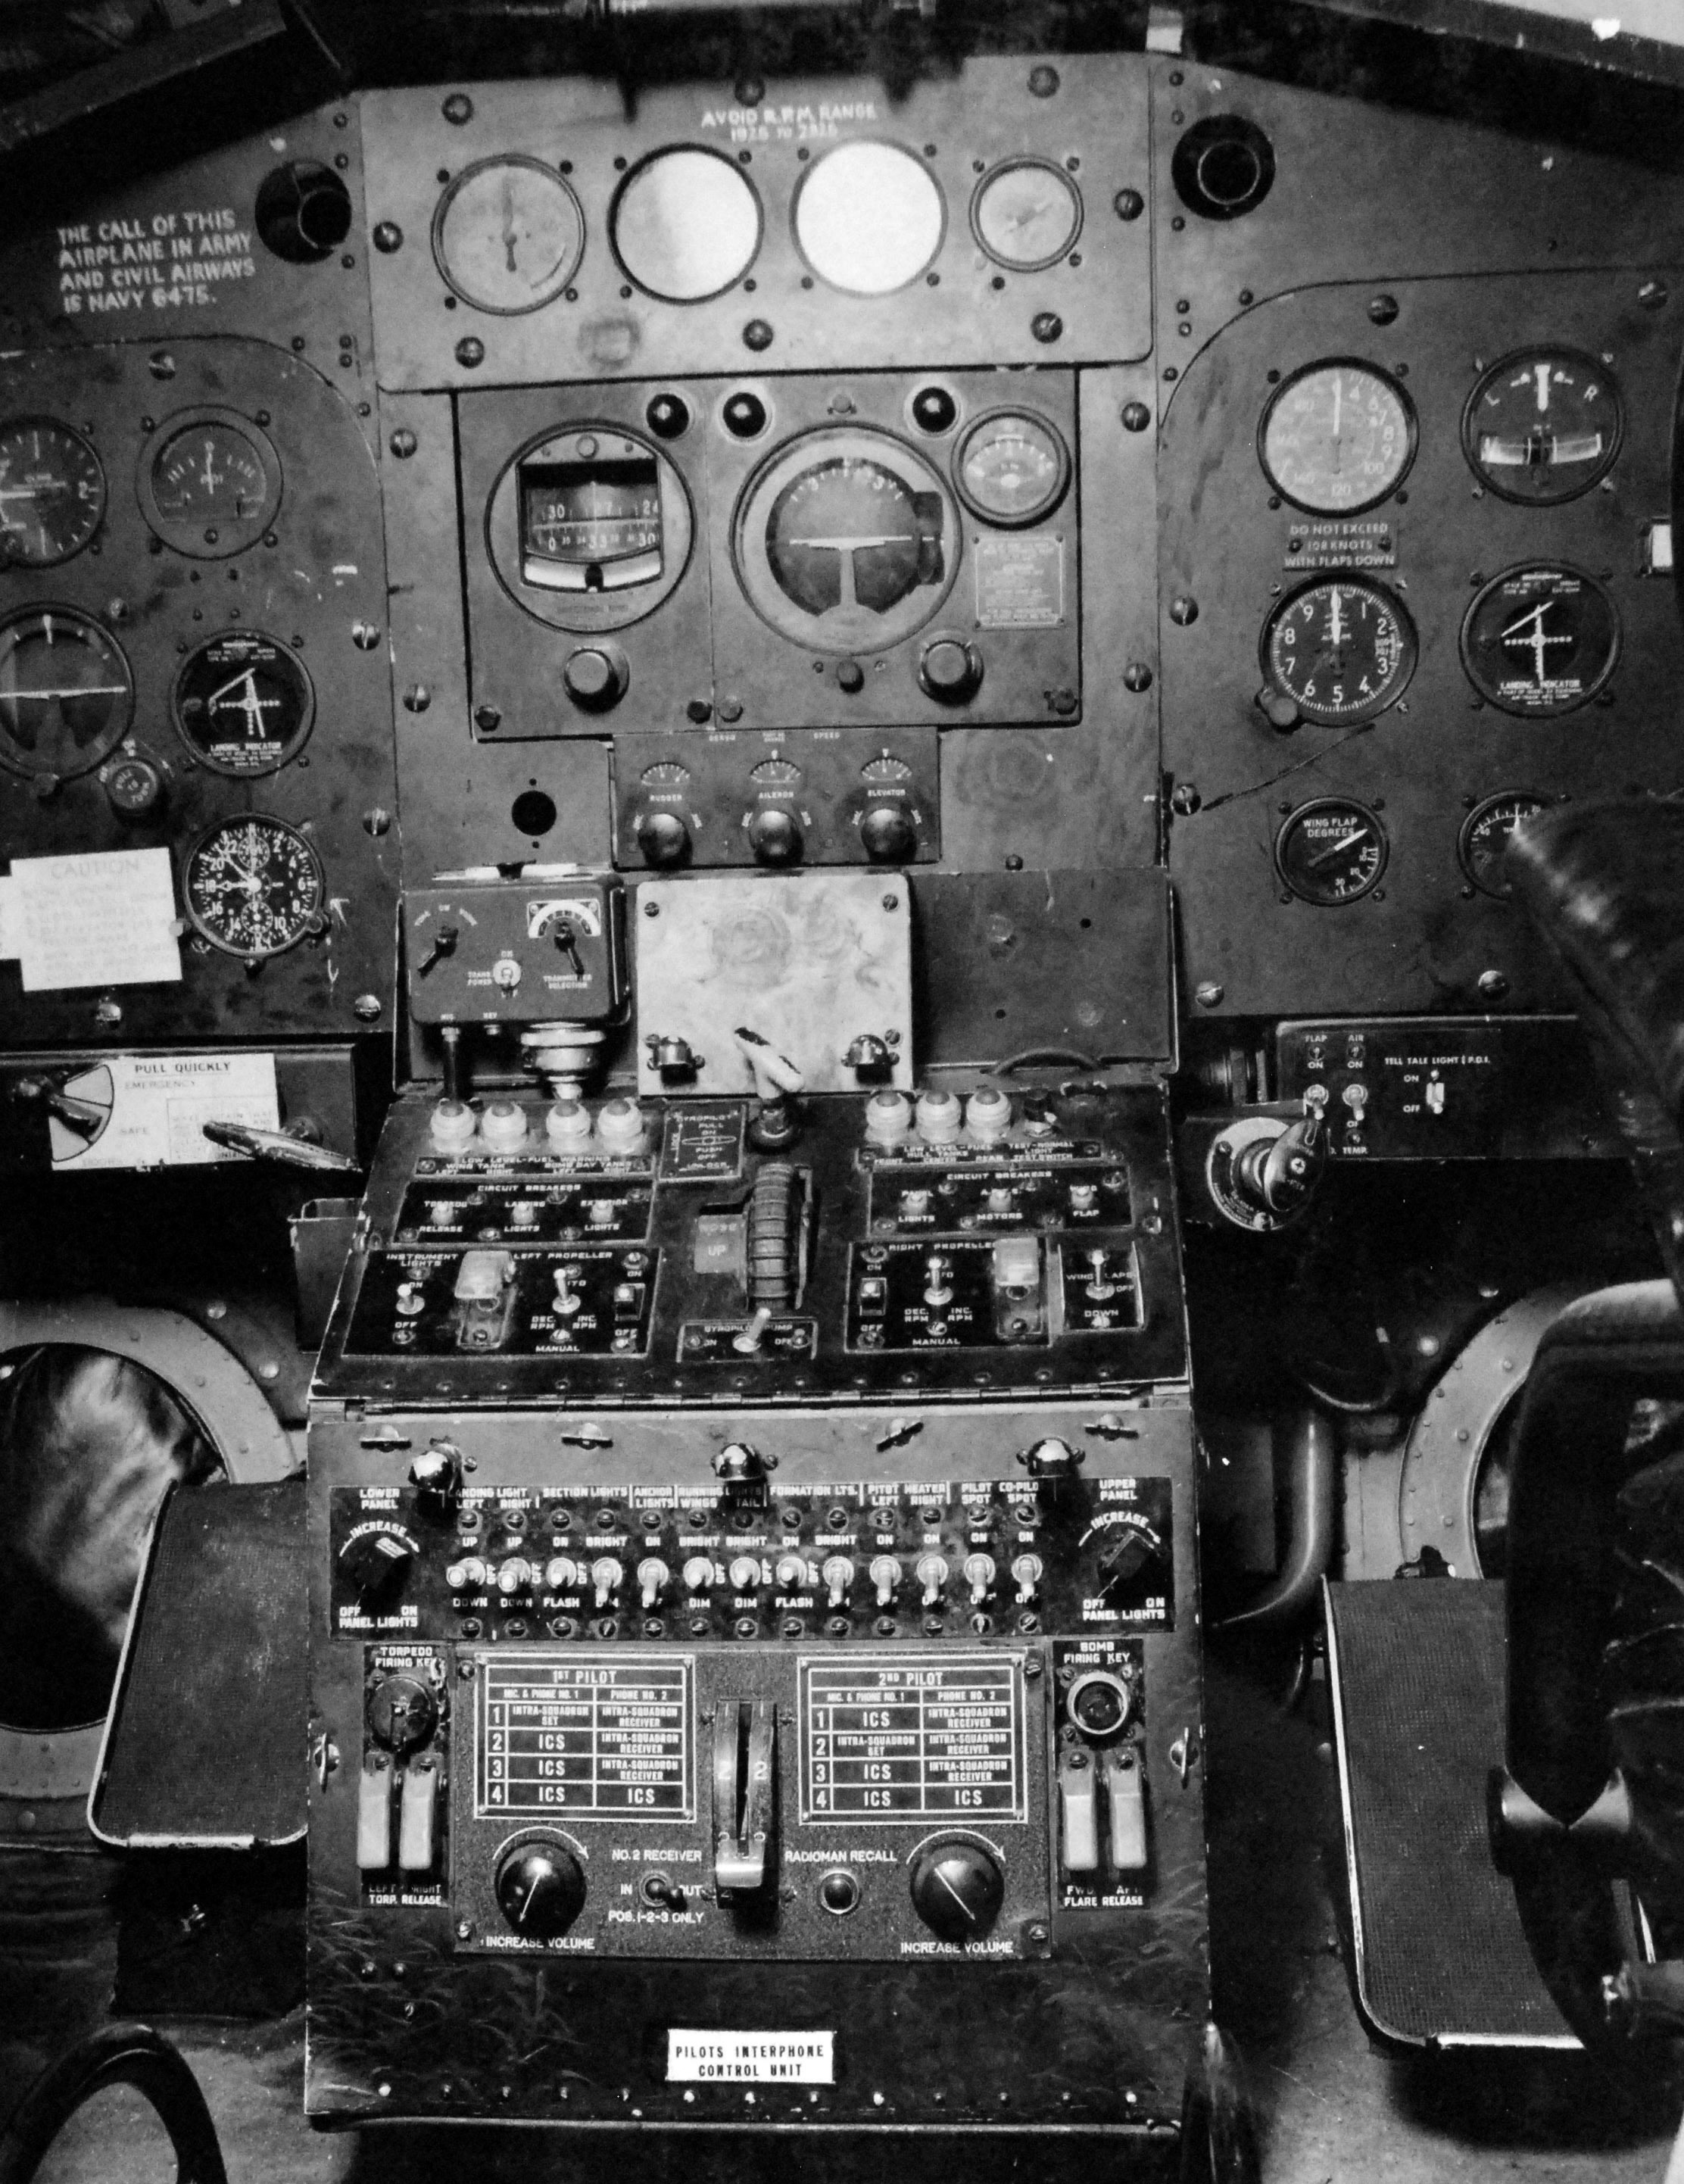 Instrument panel of a Martin PBM-3R Mariner stationed at the Naval Air Station Banana River, Florida, United States, 24 Feb 1943. Photo 2 of 3.